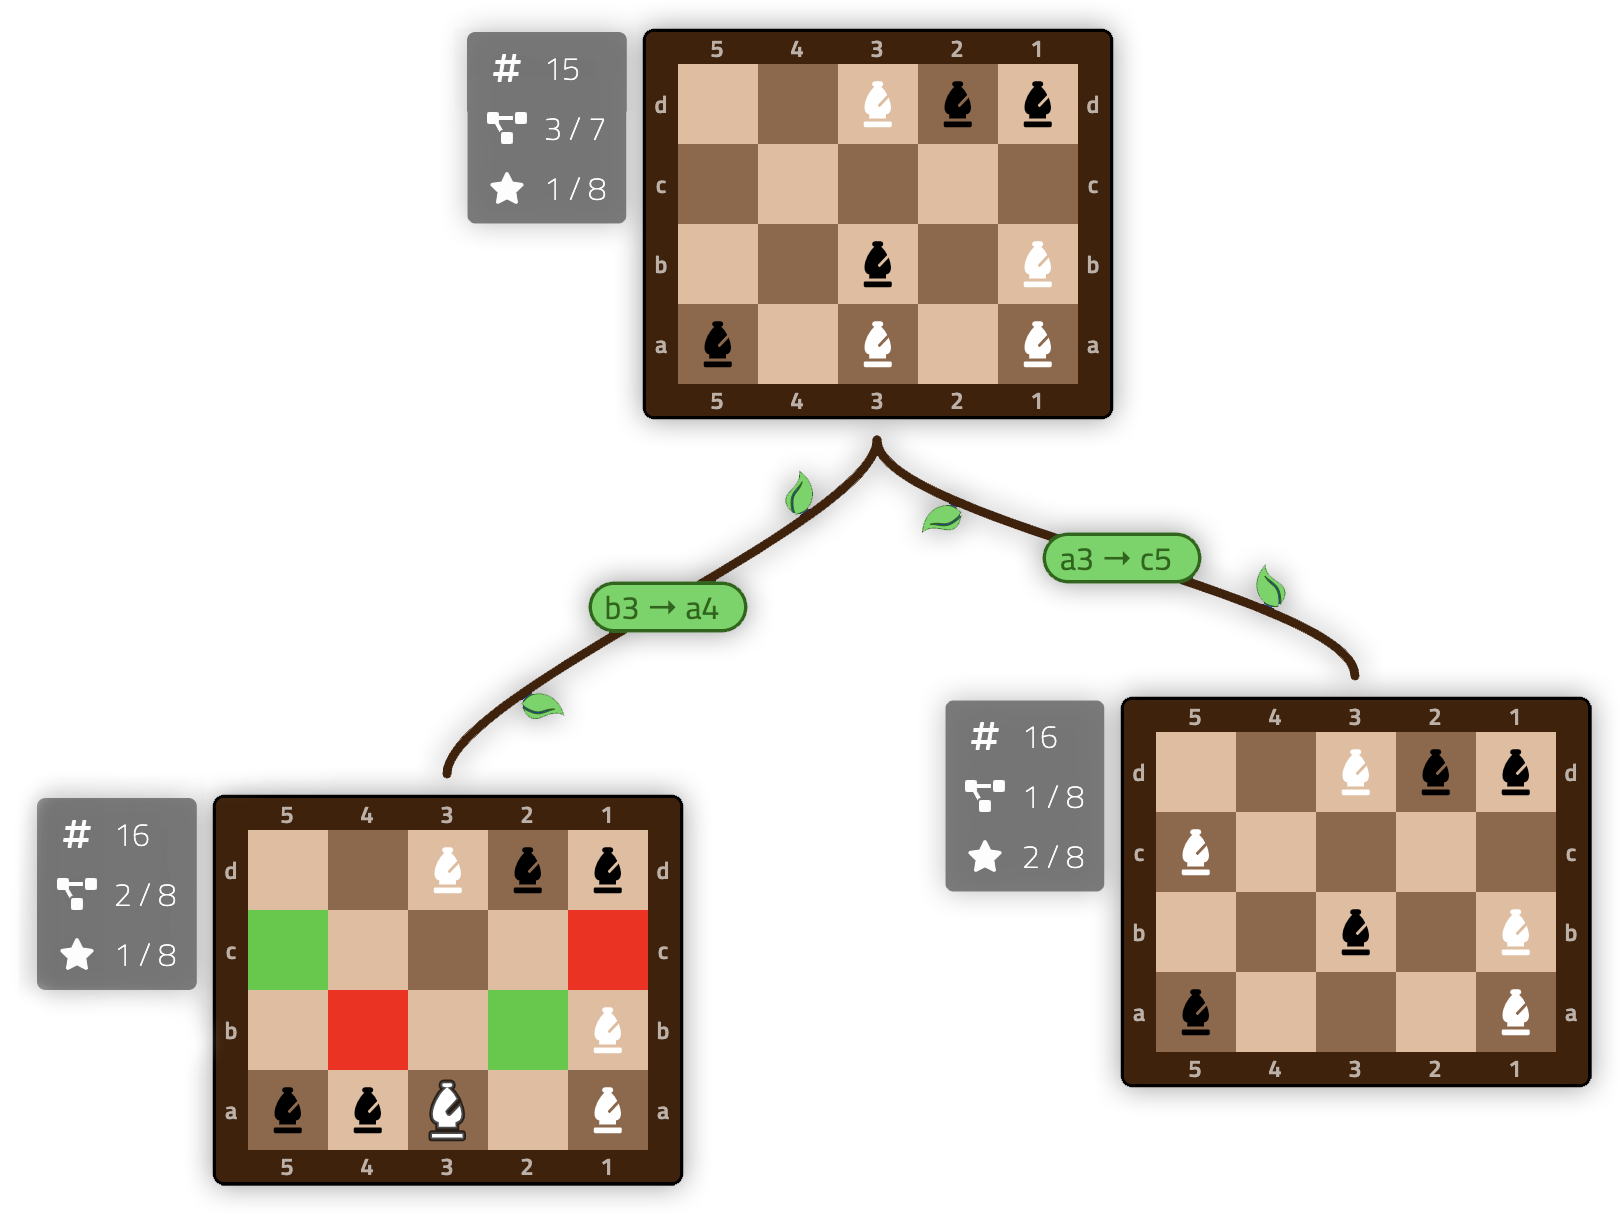 A chess board with two other chessboards connected to it, resembling child nodes in a graph. Each board has various numerical statistics displayed to the left side.